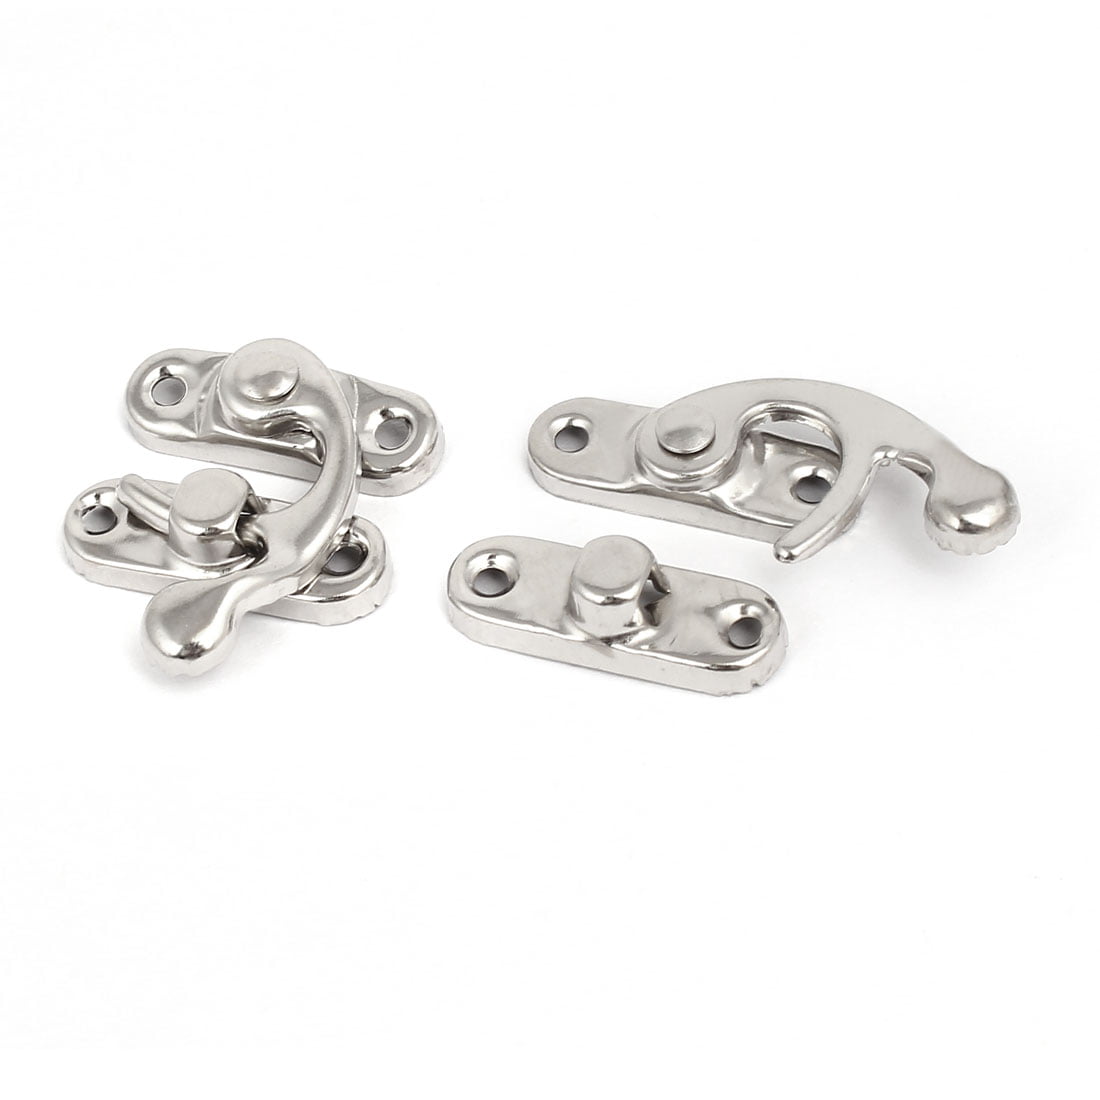 Jewelry Box Right Swing Arm Clasp Latches Catch Toggle Hasp Silver Tone ...